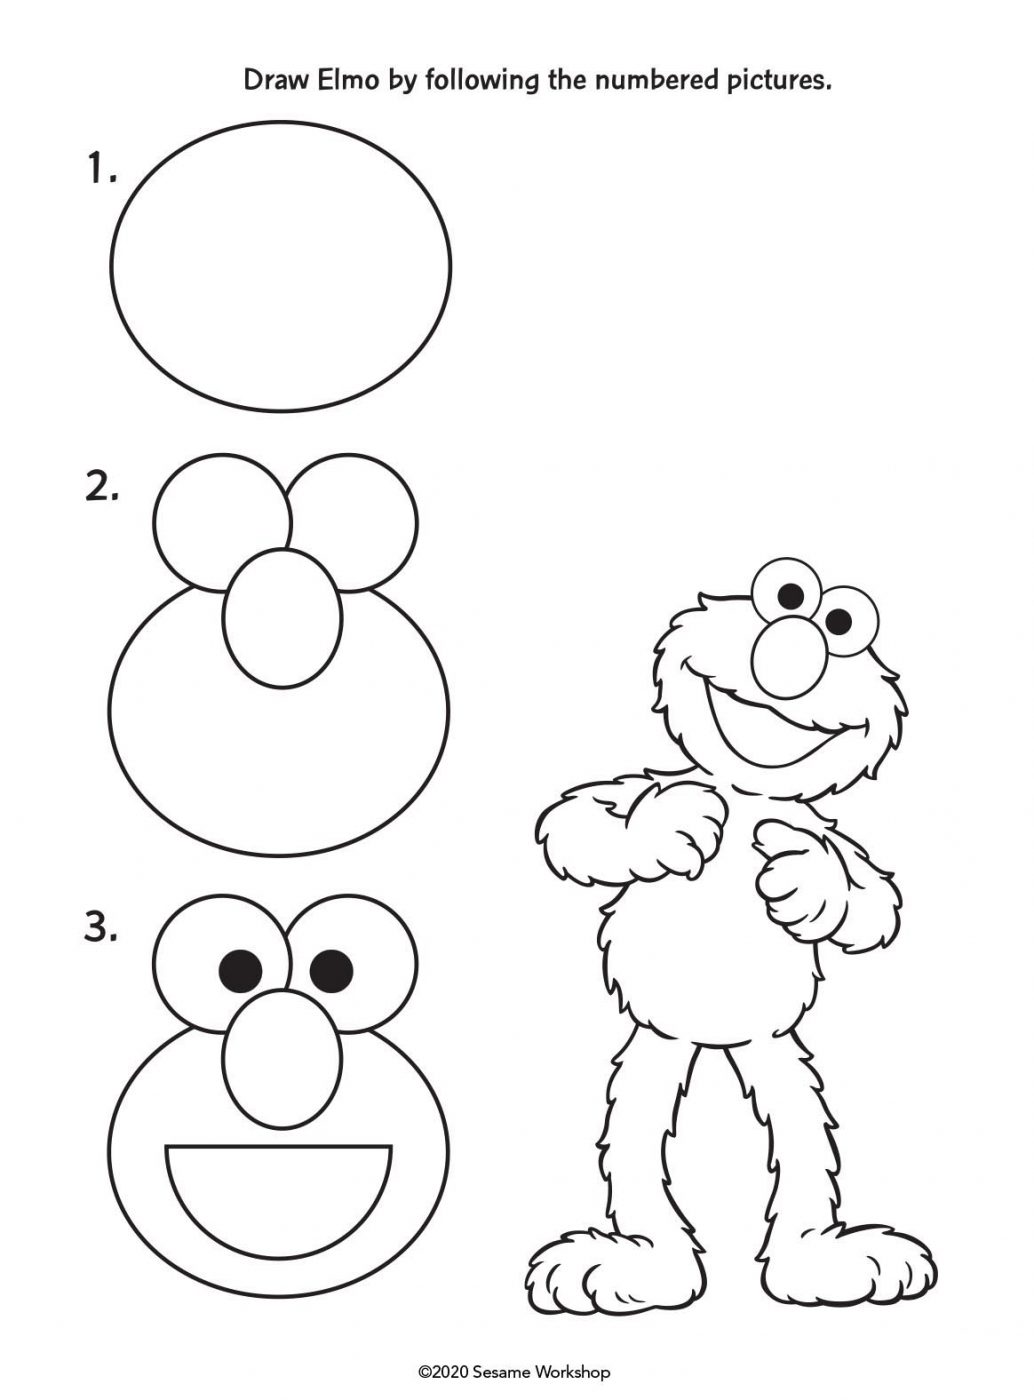 Draw Elmo by following the numbered pictures.